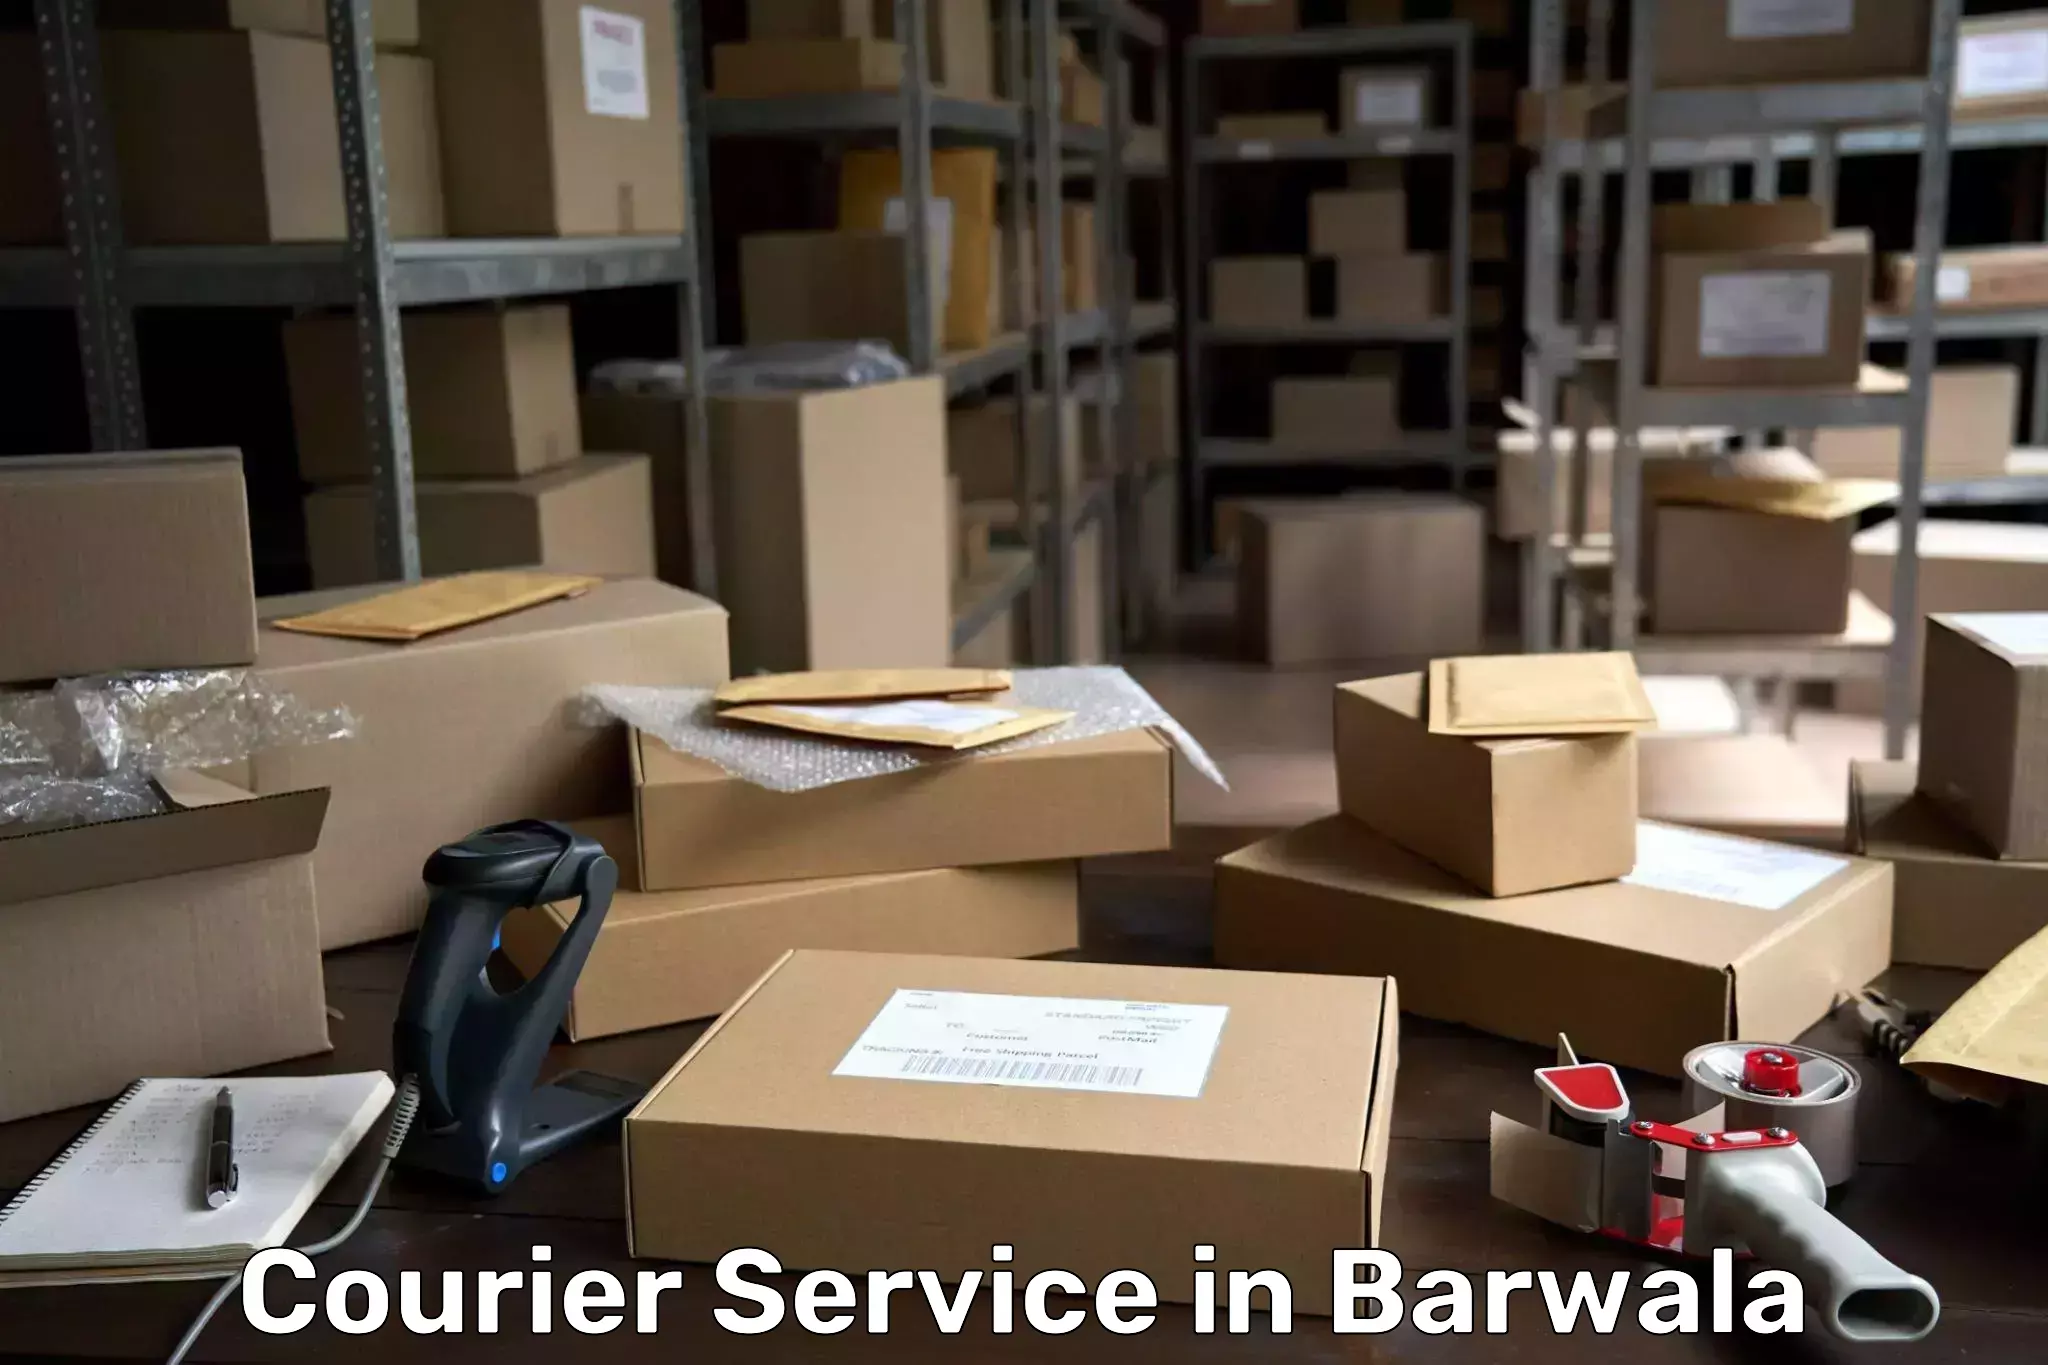 High value parcel delivery in Barwala